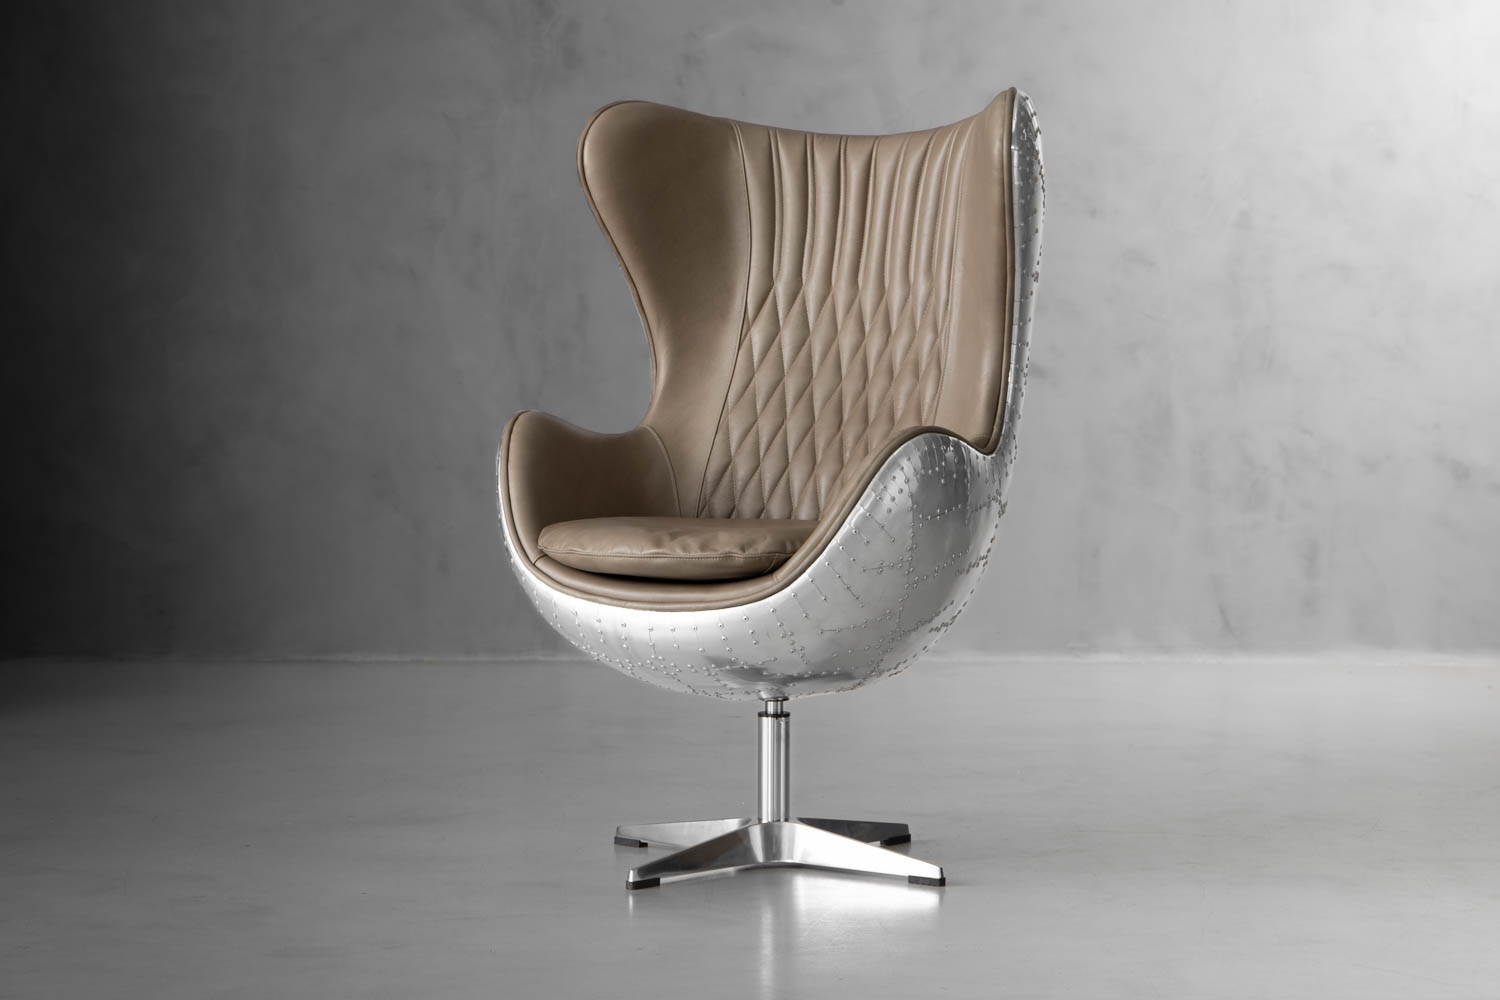 Hawker Leather Egg Chair - Spitfire Edition | Cielo